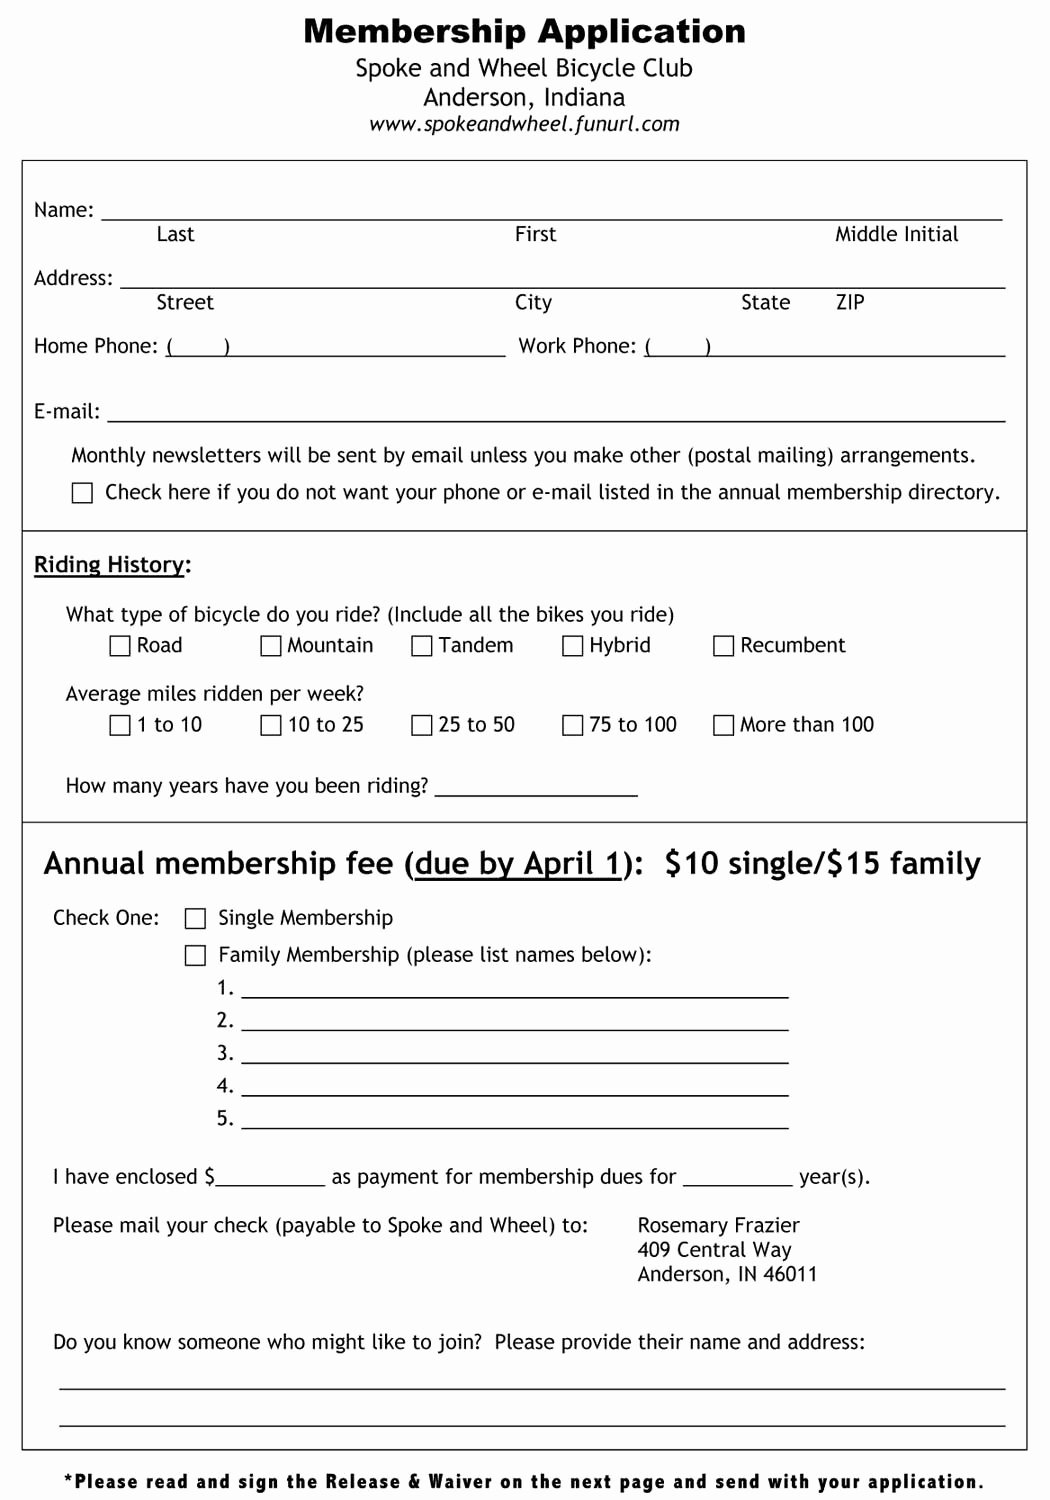 Club Application Template Lovely Spoke and Wheel Bicycle Club anderson Indiana Membership